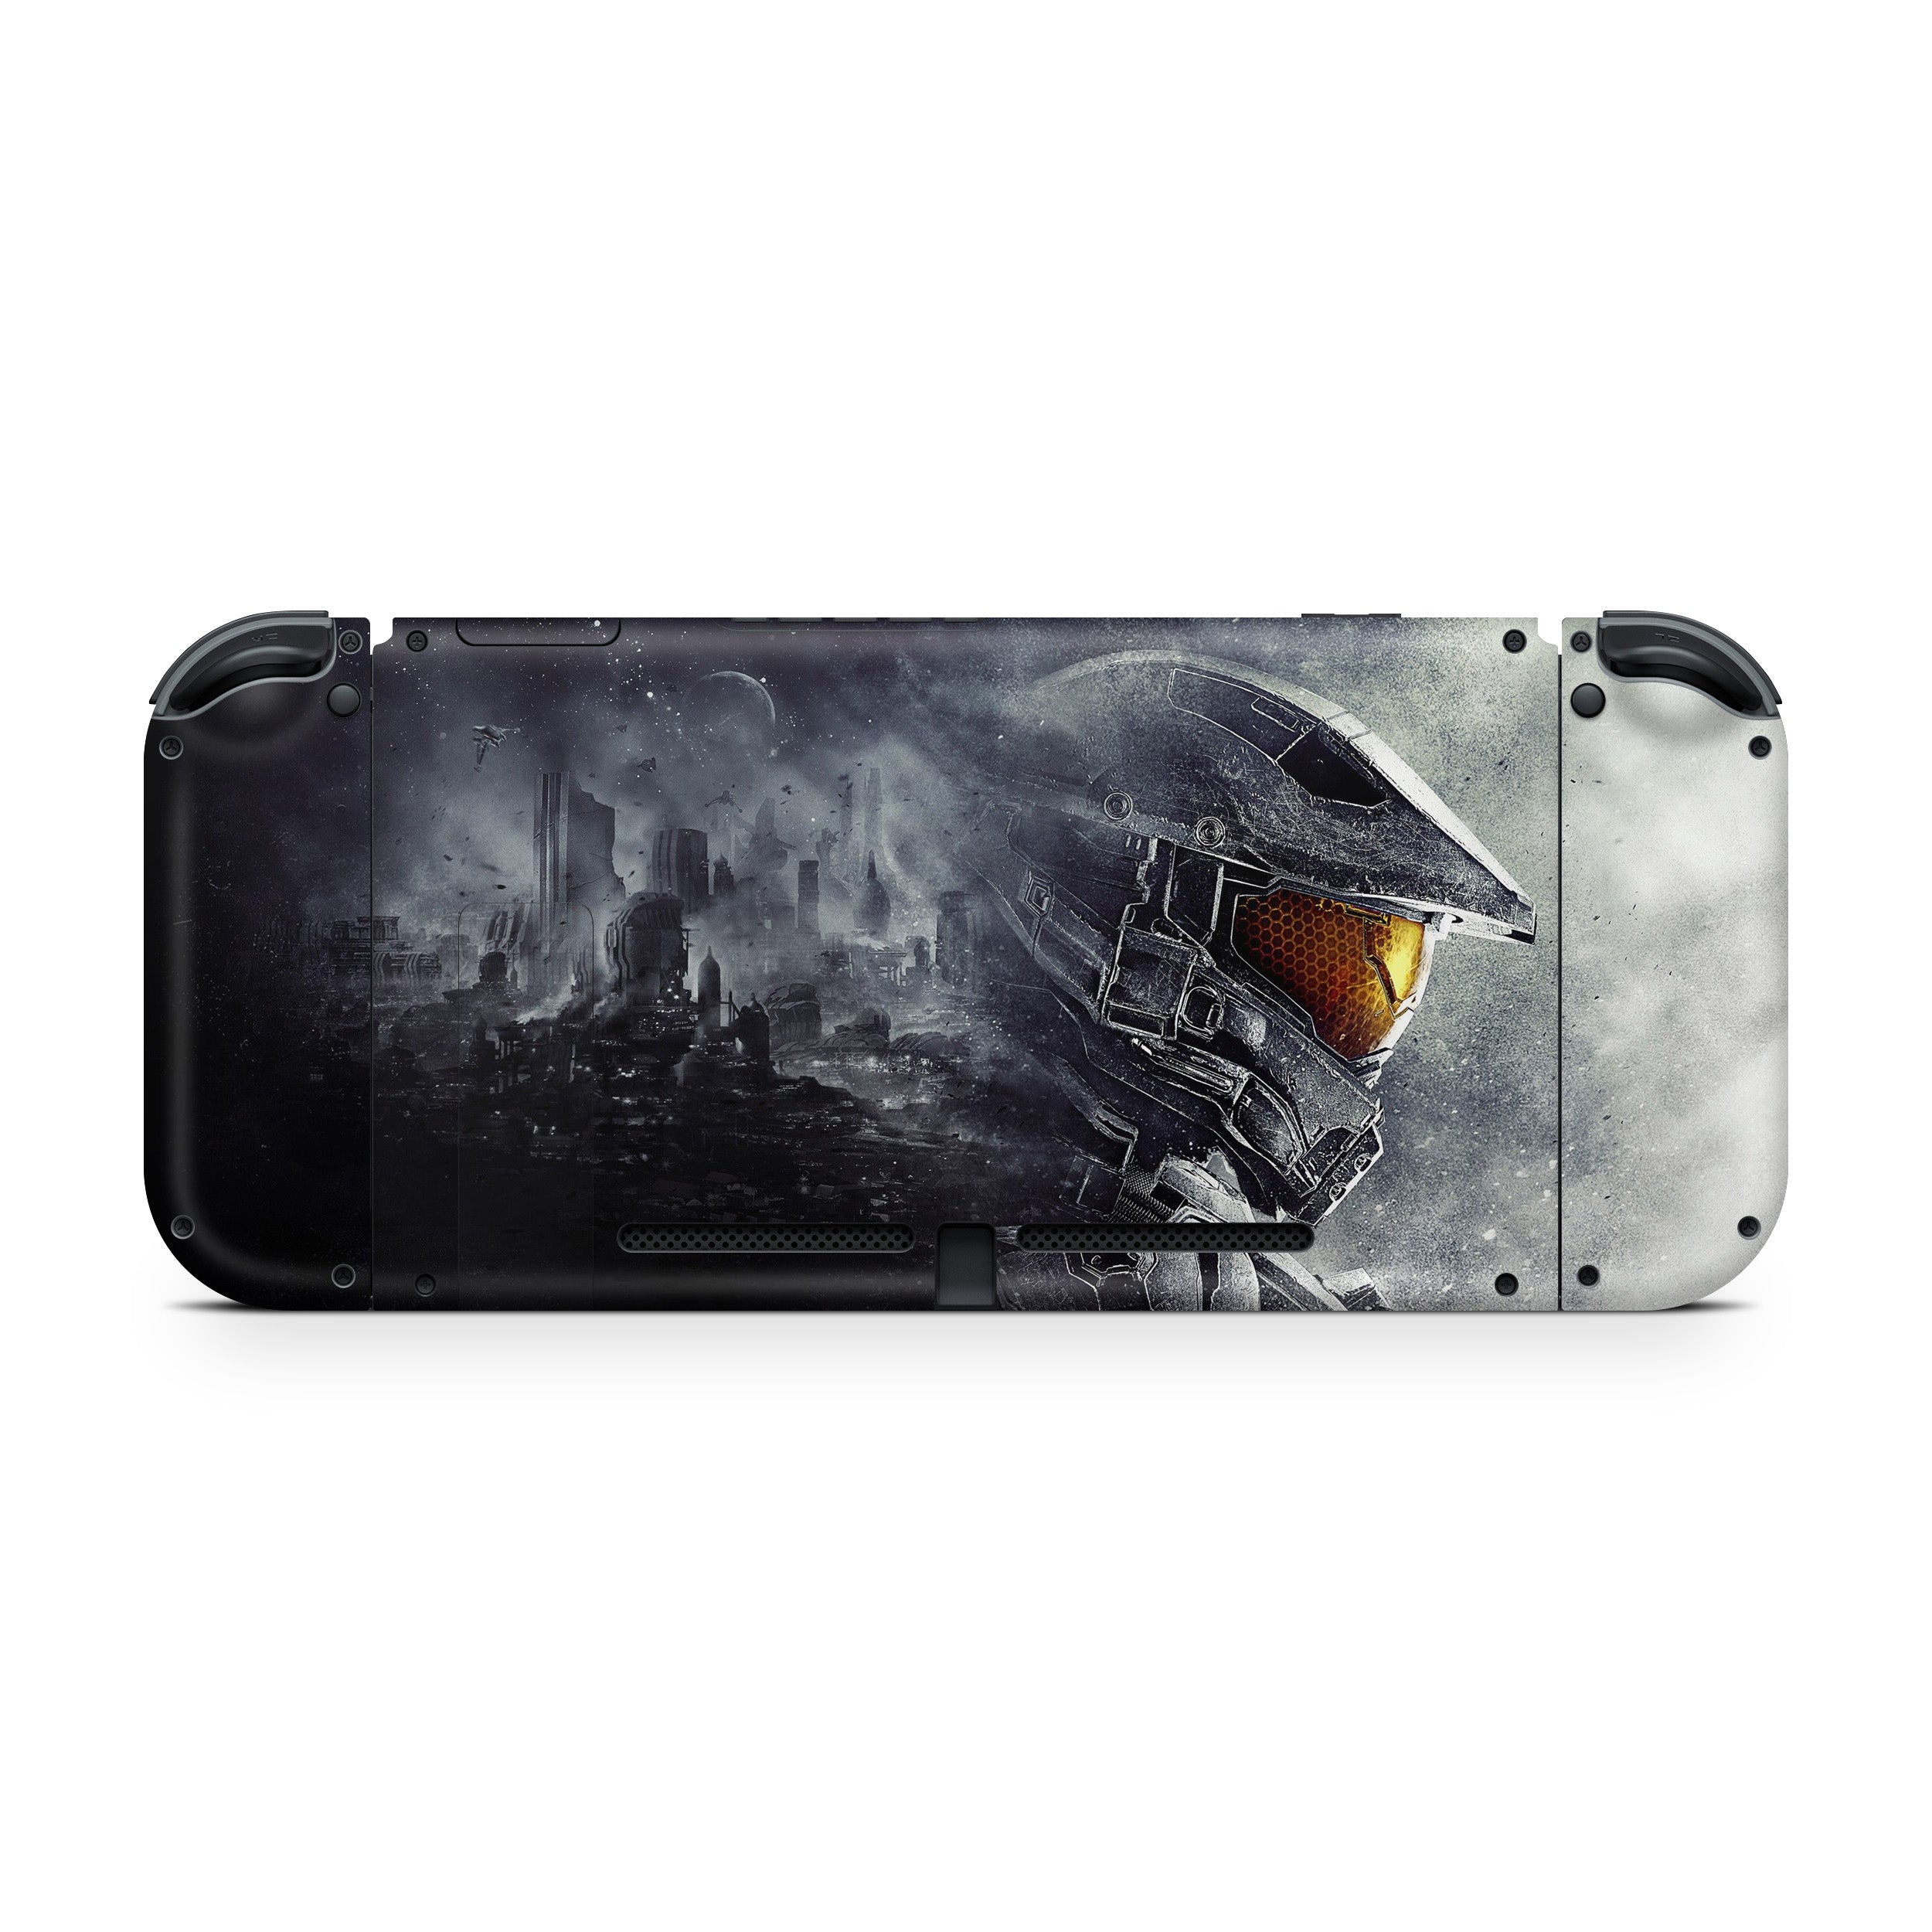 Customize Your Nintendo Switch with Halo Skin! (Version 2)